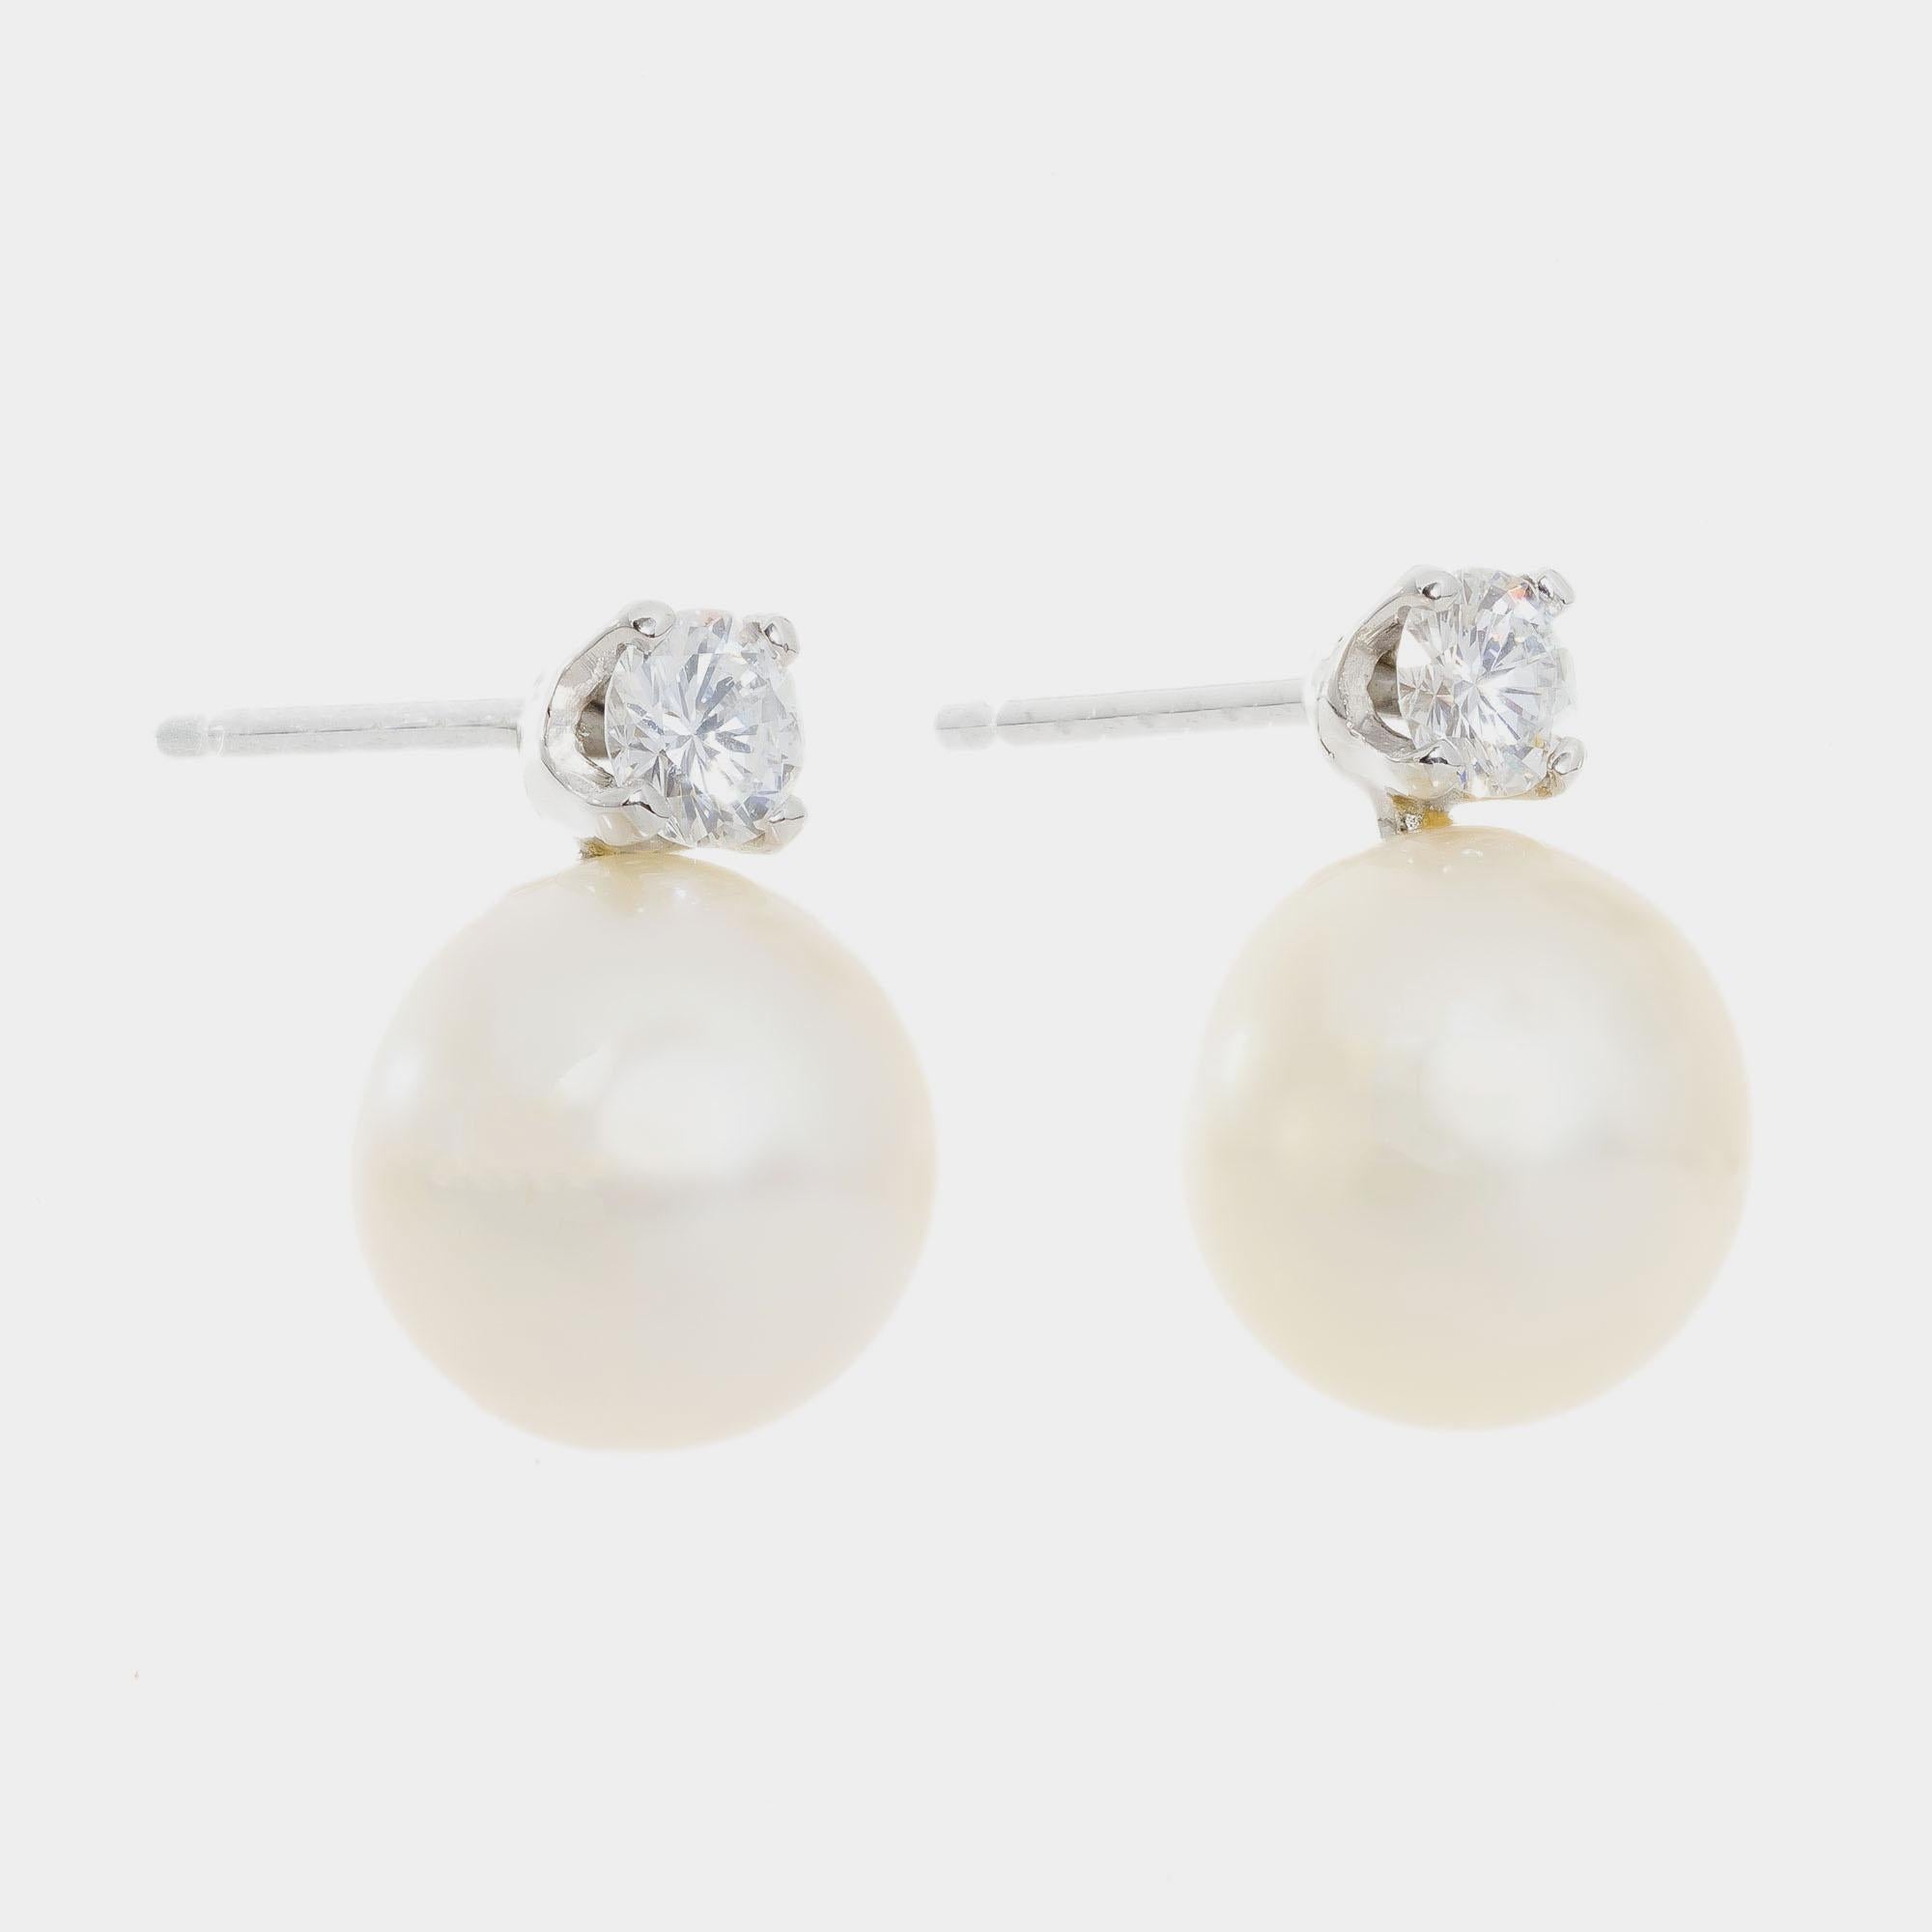 8mm Japanese Akoya cultured pearl and diamond earrings. 2 round brilliant cut diamonds with 2 round cultured 8mm pearls set in platinum. 

2 cultured white with crème hue pearls, few blemishes good lustre, 8mm
2 round brilliant cut diamond, G-H VS